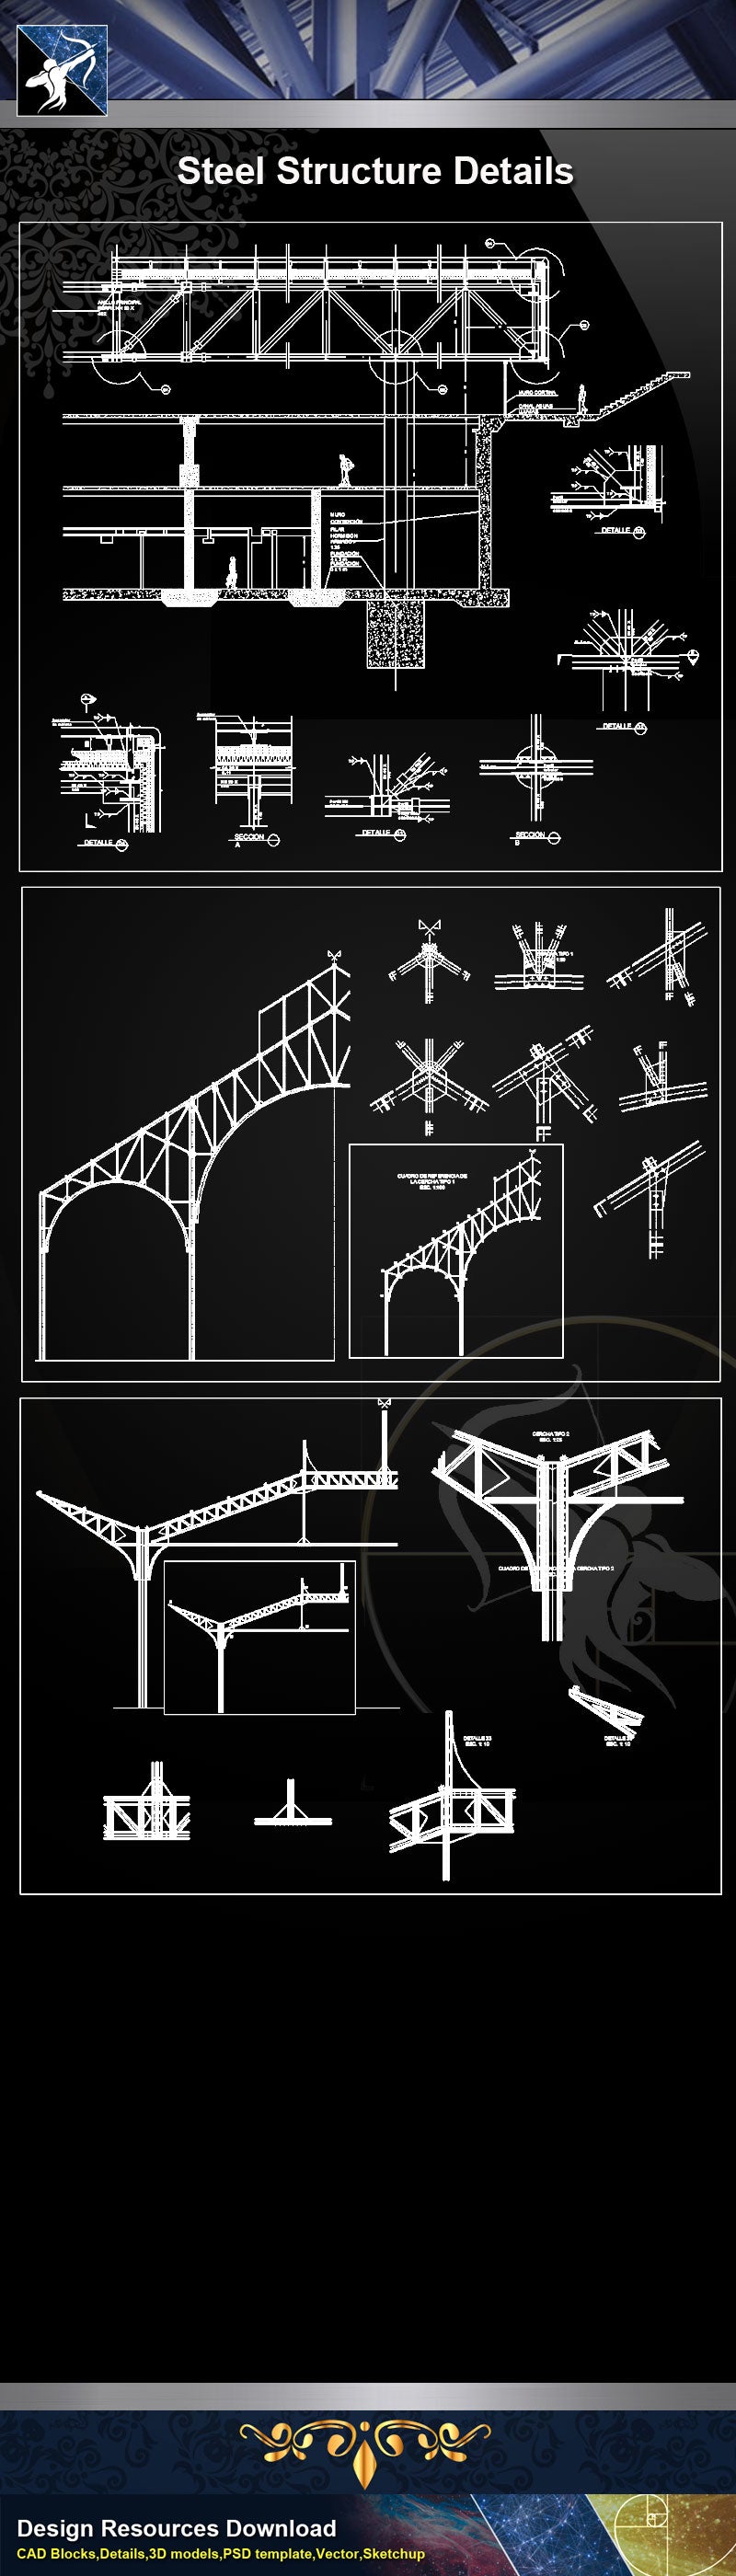 ★【Steel Structure Details】Steel Structure Details Collection V.7